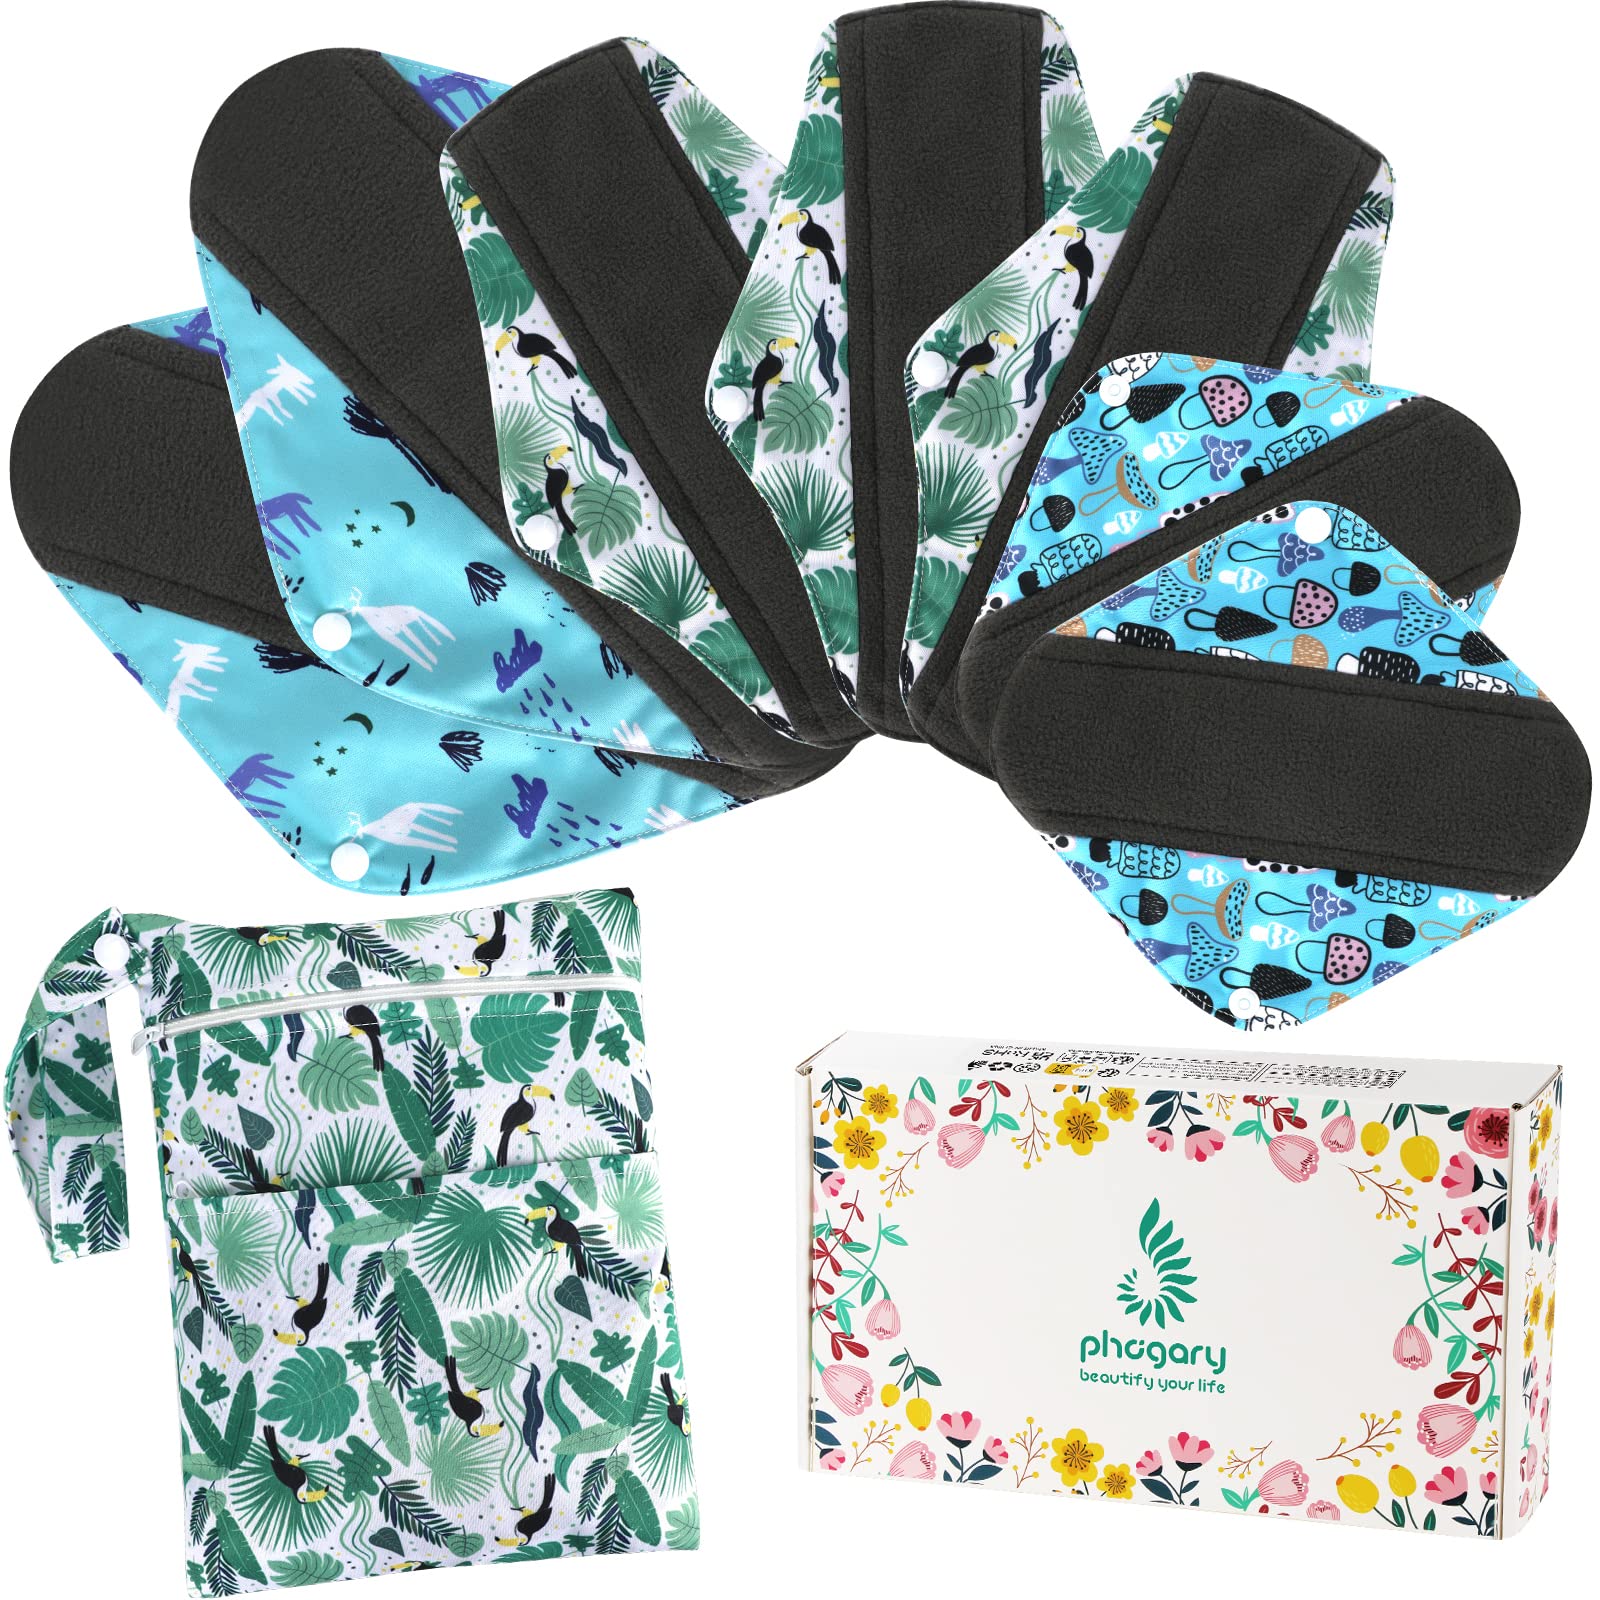 7 in 1 Reusable Menstrual Pads，7 PCs Sanitary Pad Set with Wings Waterproof  Washable Sanitary Menstrual Cloth Pads Panty Liners for Women